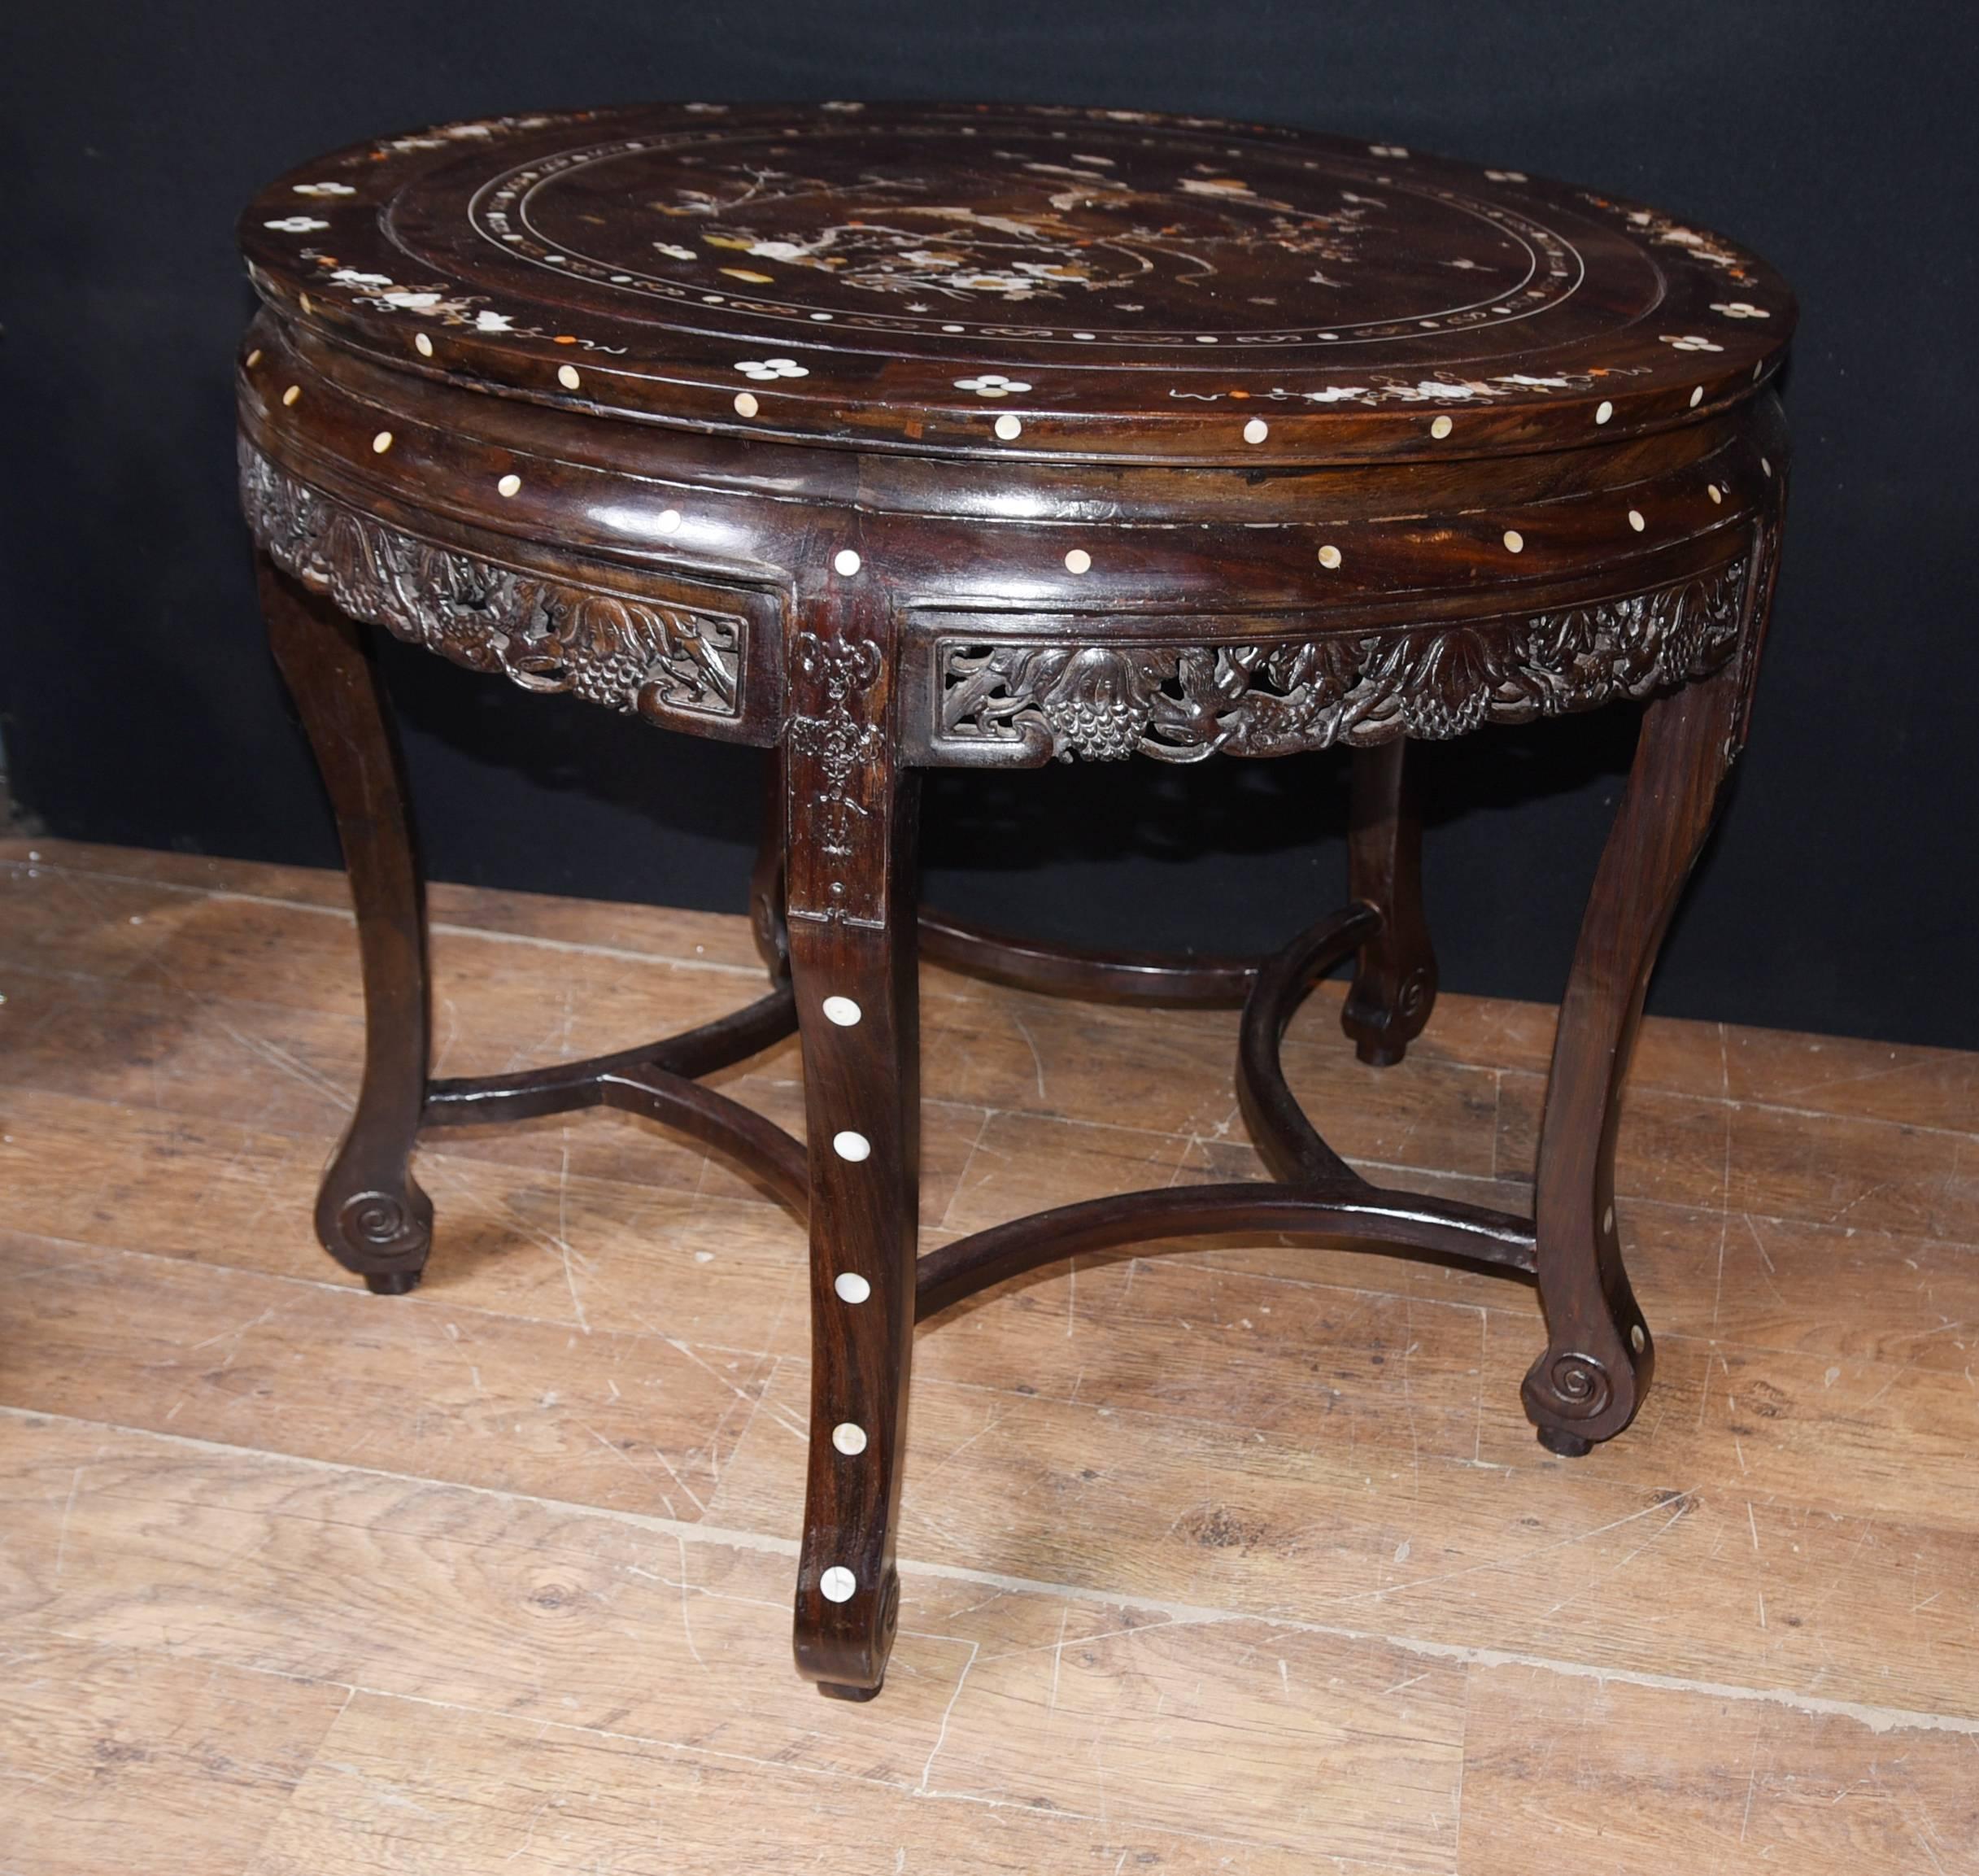 Gorgeous antique Chinese dining set with intricate mother-of-pearl inlay
Round table complemented by six stools
We date this wonderful dining set to circa 1920 and hence it's highly collectable
Classic inlay work showings Chinese motifs and